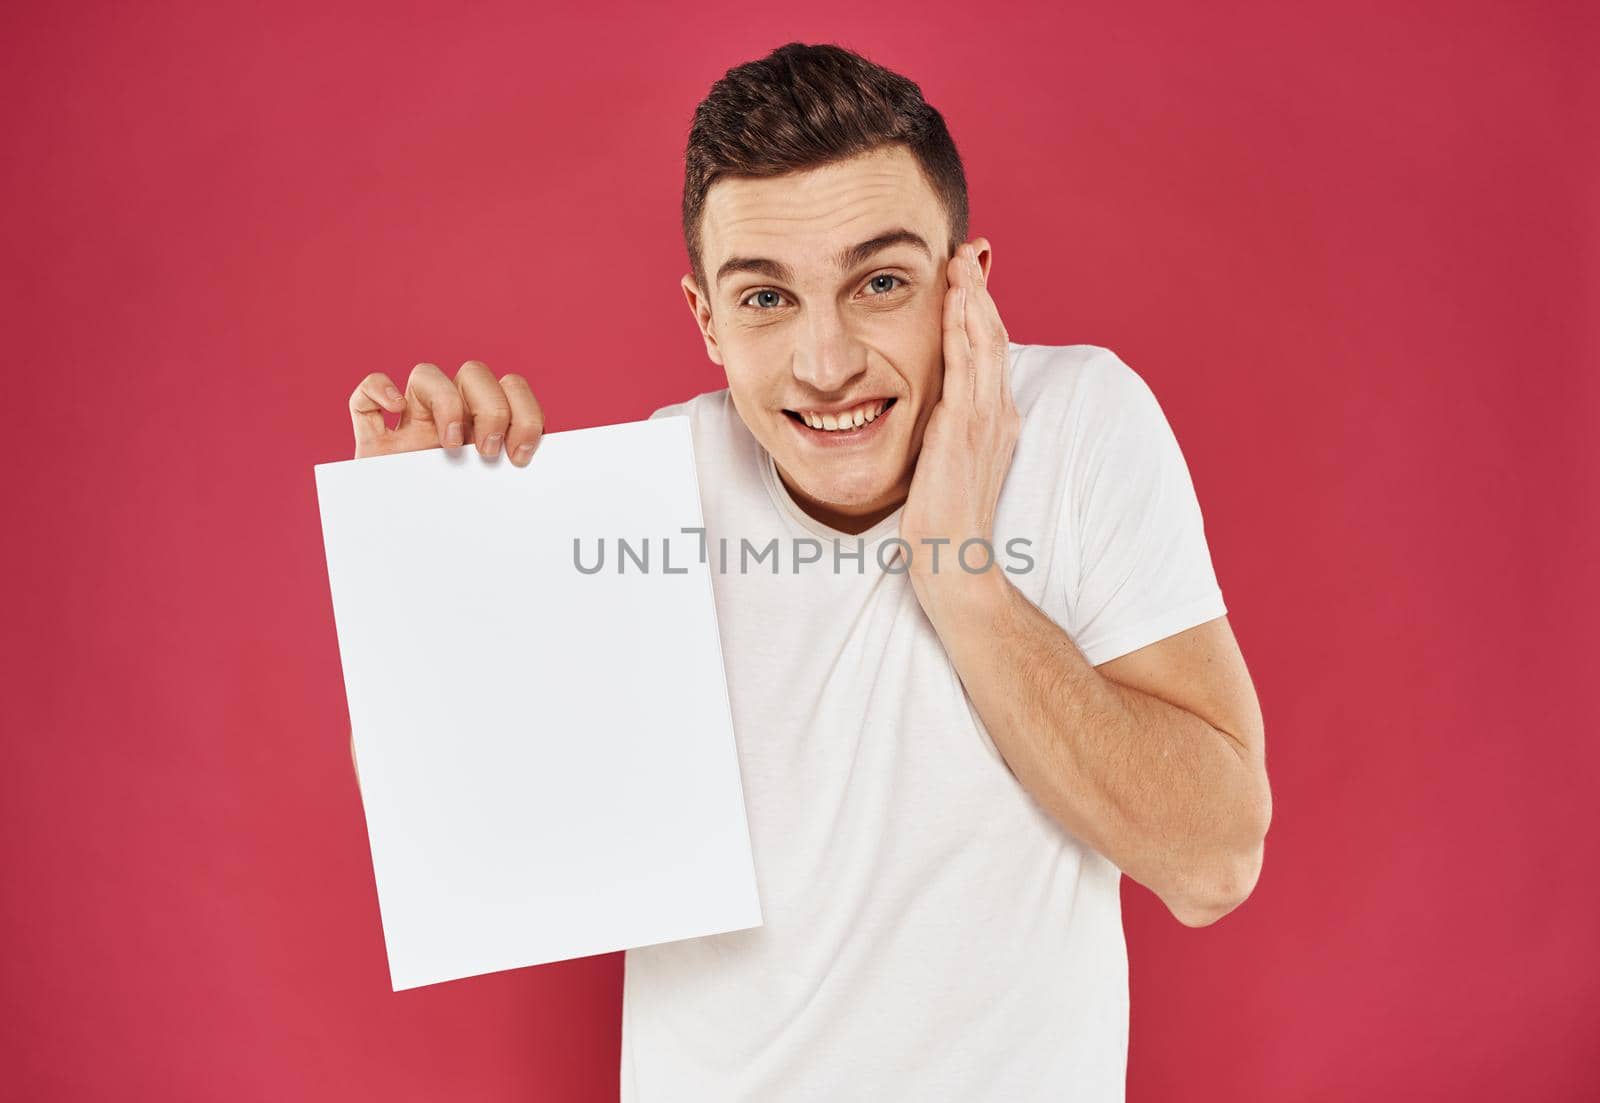 Joyful man on a red background with a white flag in his hand mock up poster by SHOTPRIME